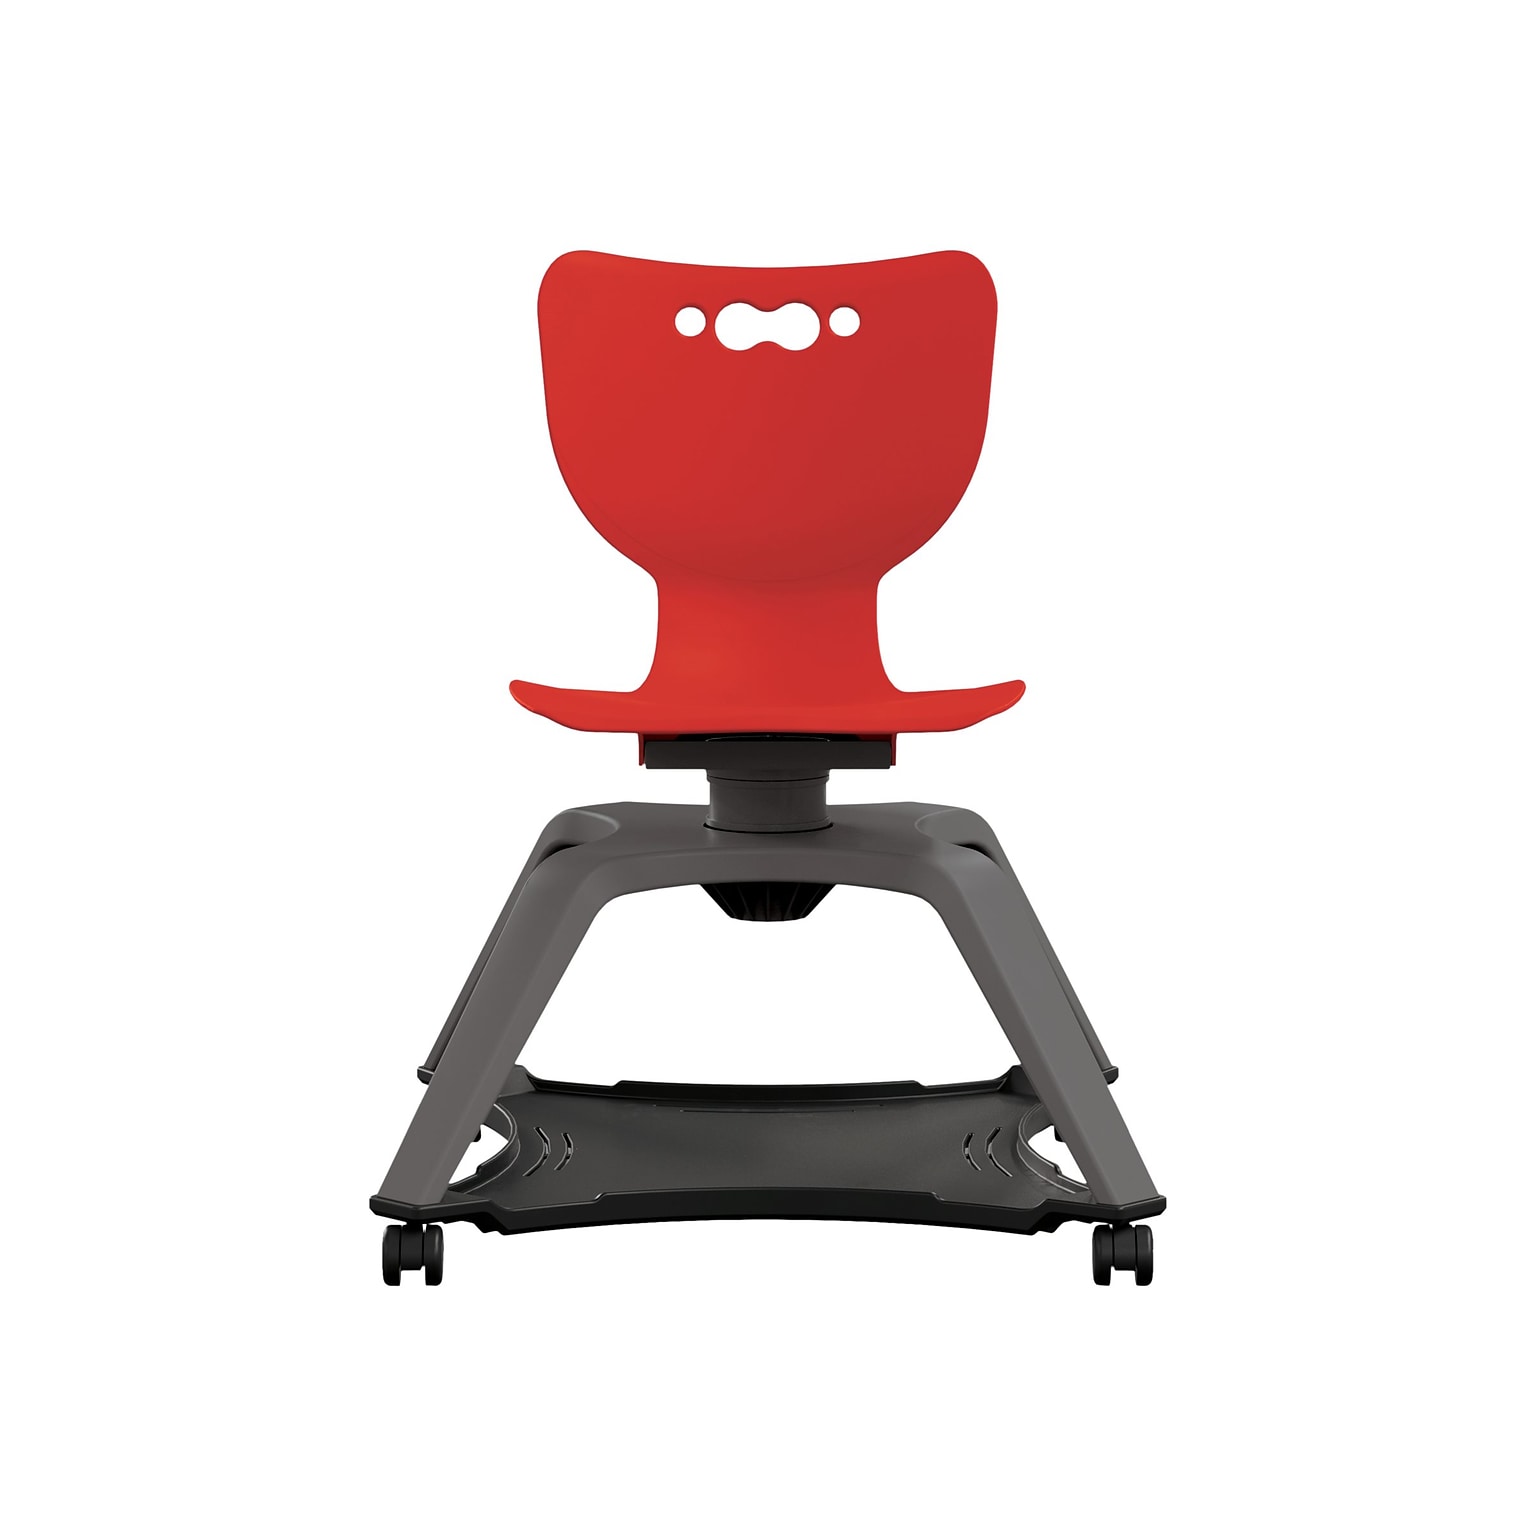 MooreCo Hierarchy Enroll Polypropylene School Chair, Red (54325-Red-NA-NN-SC)